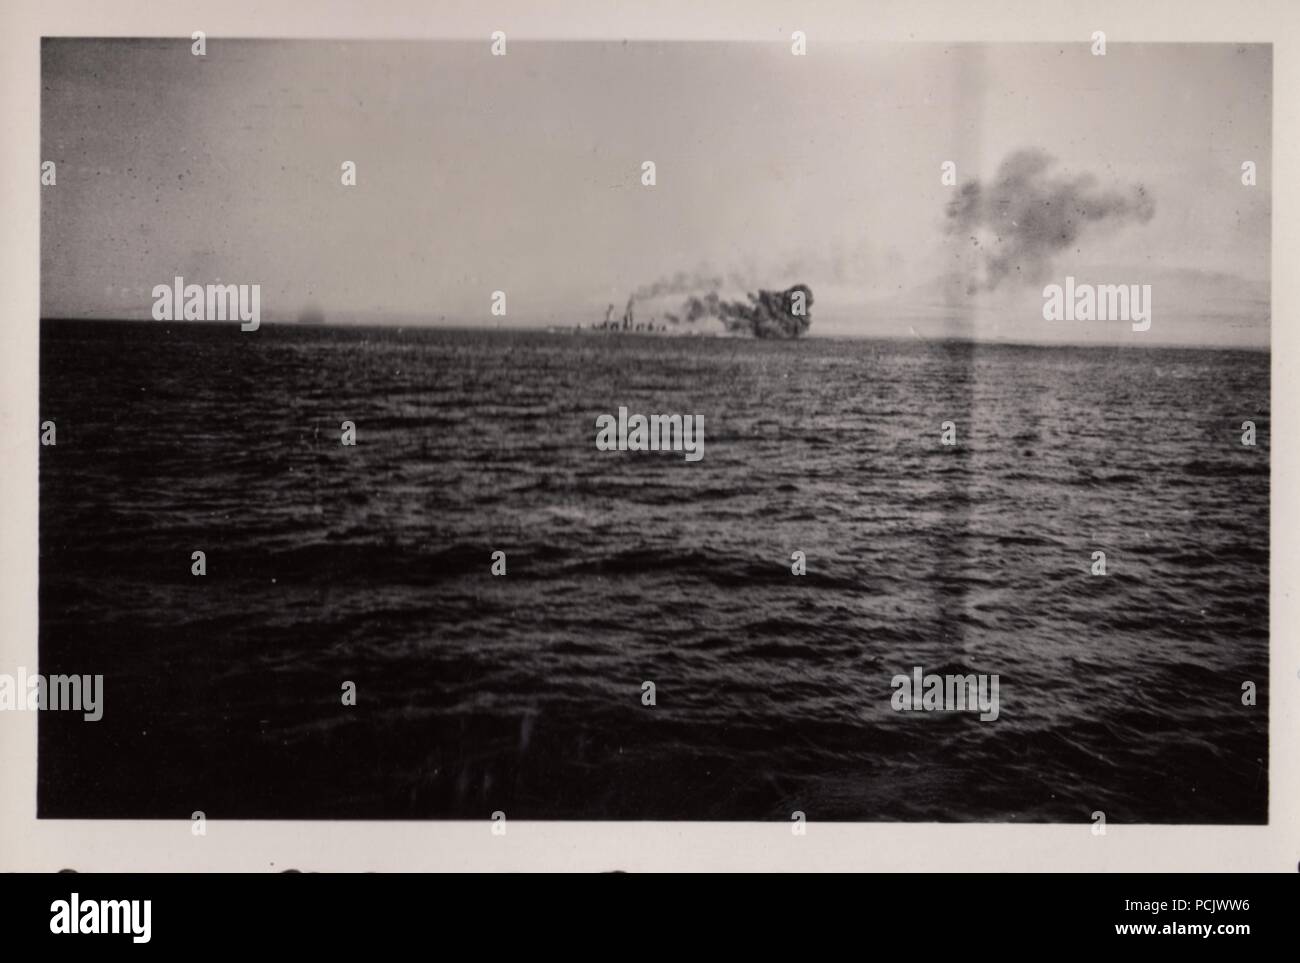 Image from the photo album of Oberfänrich Wilhelm Gaul - The German Heavy Cruiser Deutschland under air attack by Spanish Republican aircraft on 29 May 1937. Their bombs caused large fires on Deutschland, killed 31 sailors and wounded 74. Stock Photo